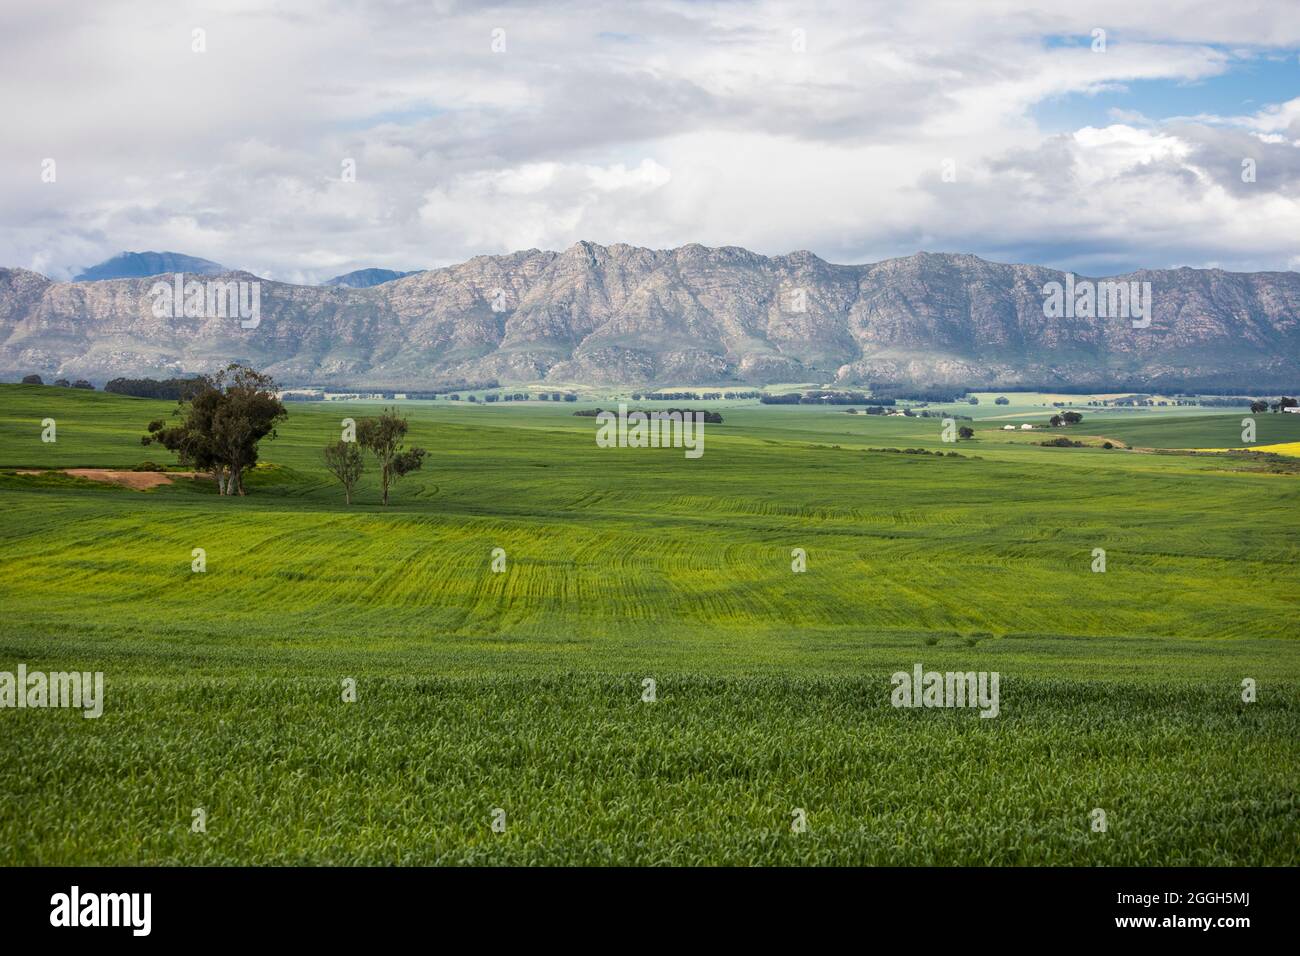 Large deep green wheat fields stretching far with mountains in the distance, large trees, and cloudy skies Stock Photo